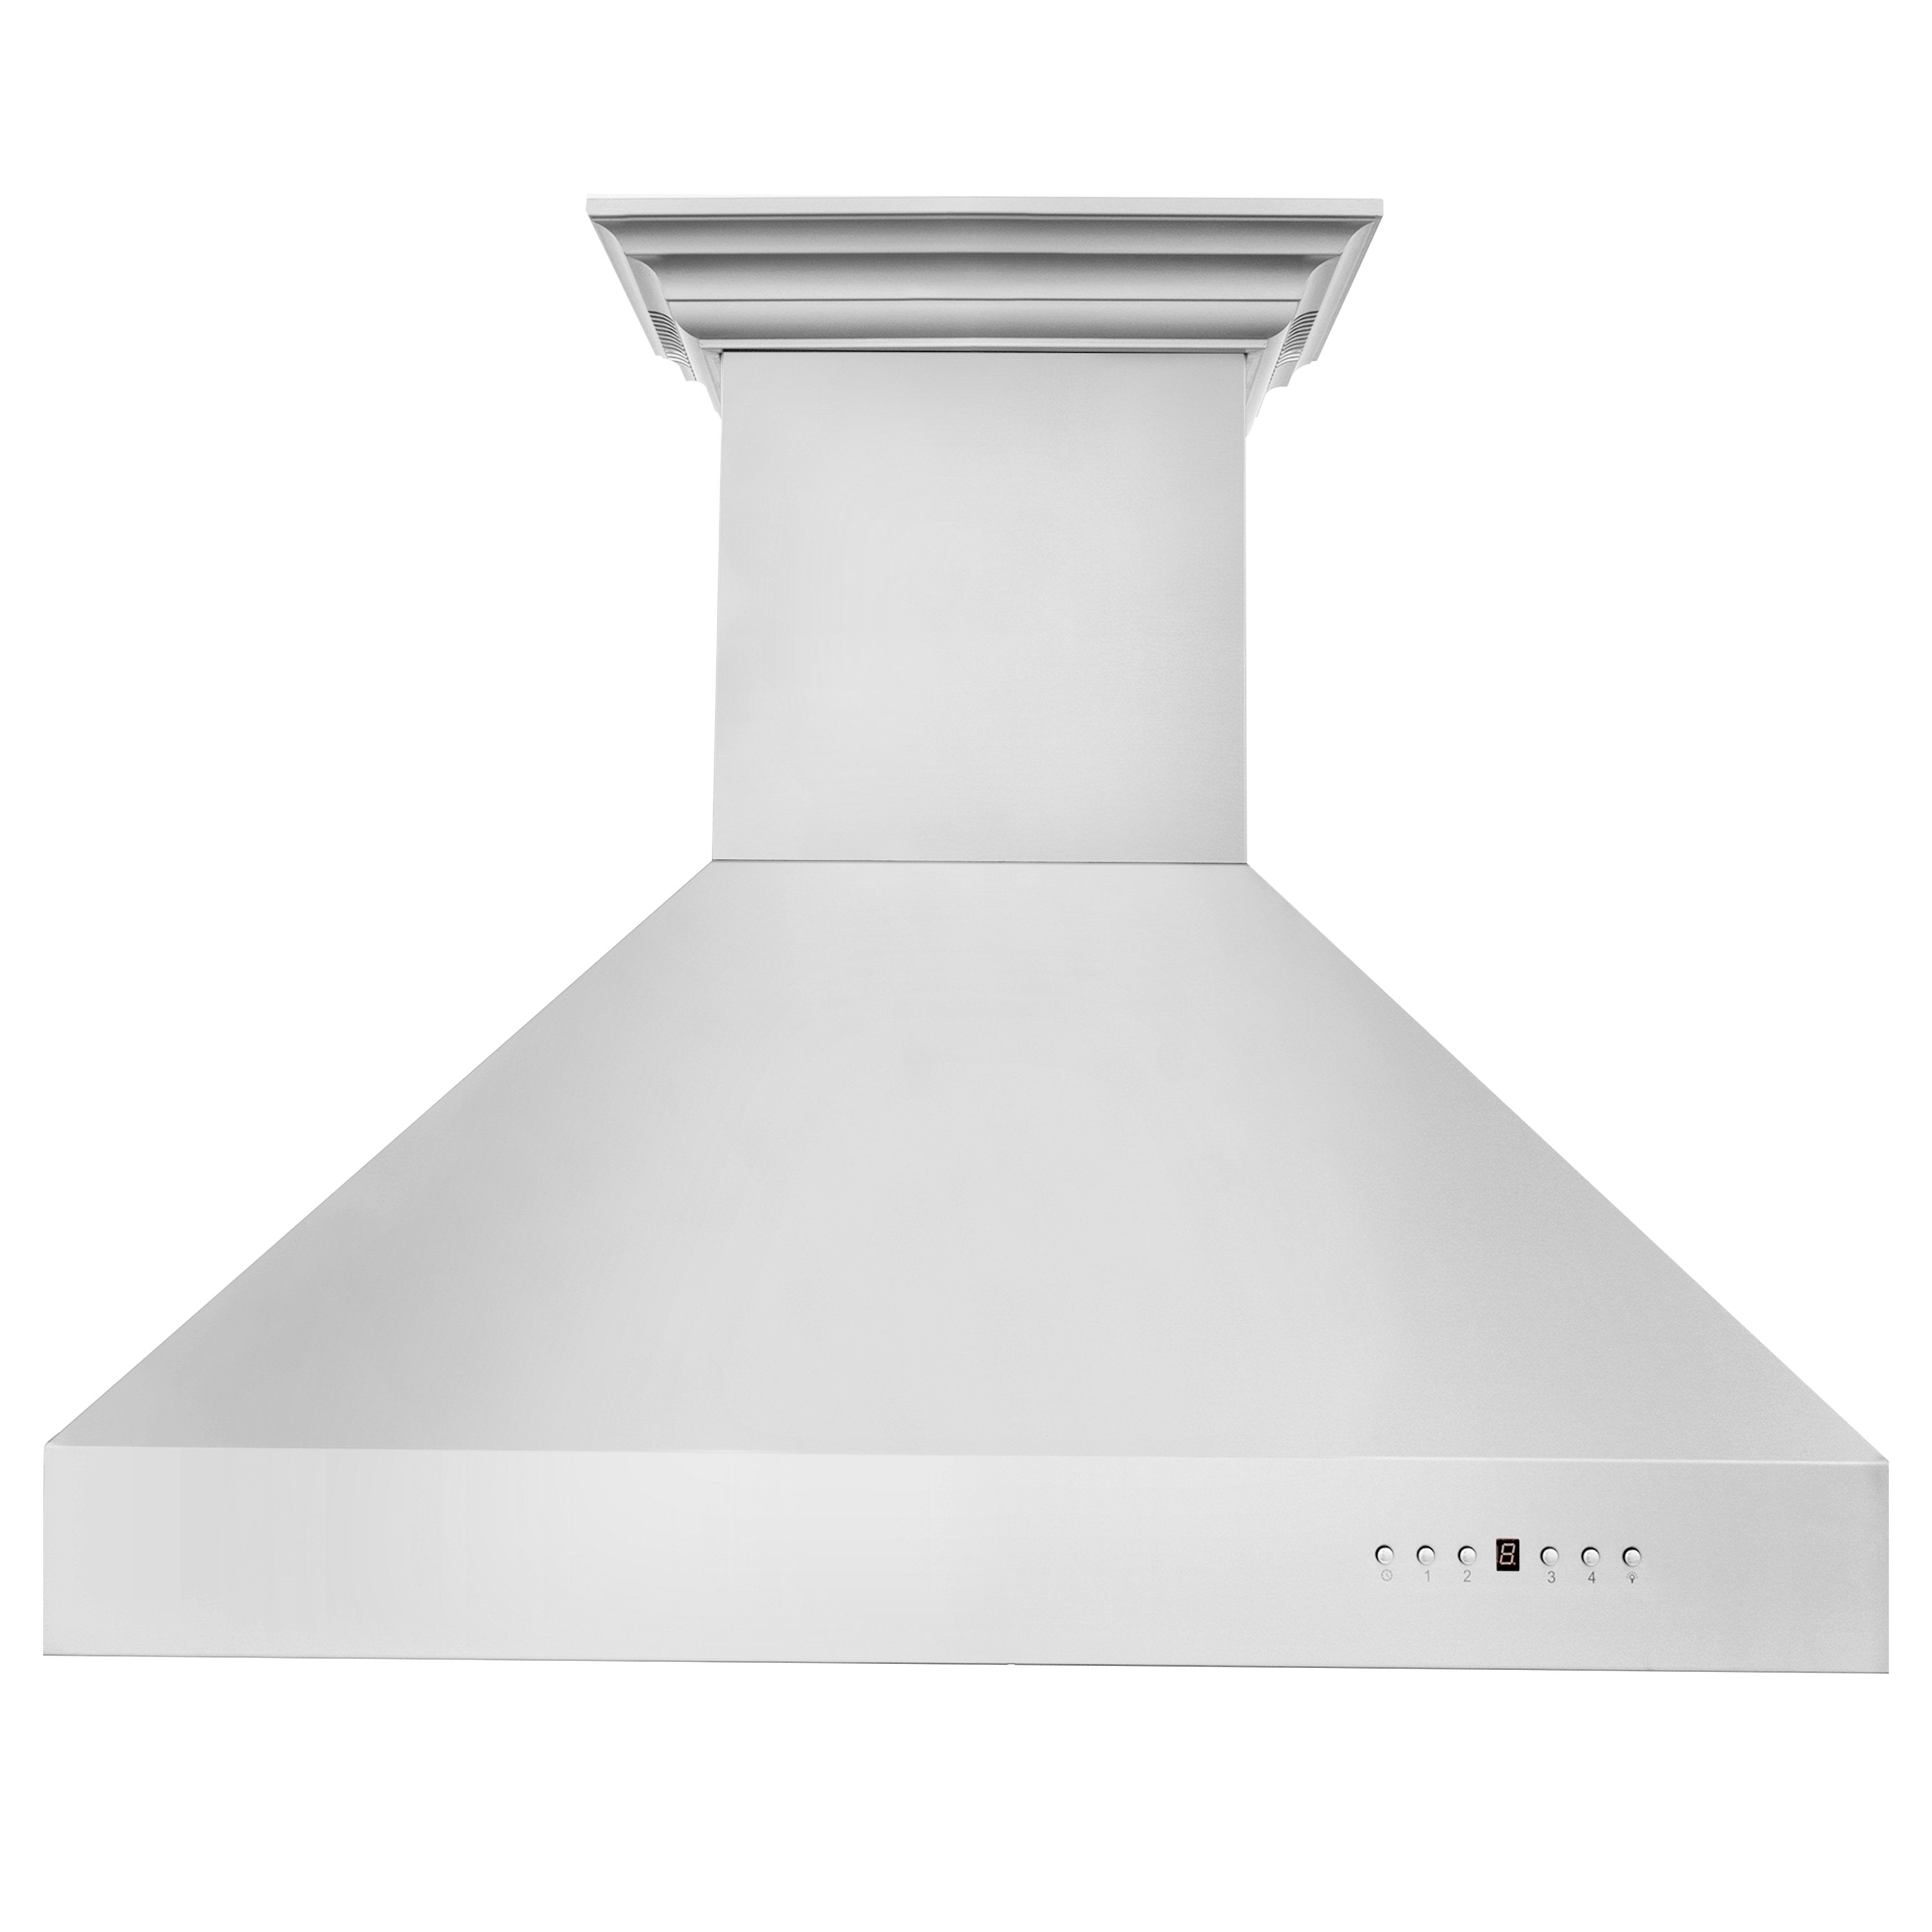 48" ZLINE CrownSound‚ Ducted Vent Professional Wall Mount Range Hood in Stainless Steel with Built-in Bluetooth Speakers (697CRN-BT-48)